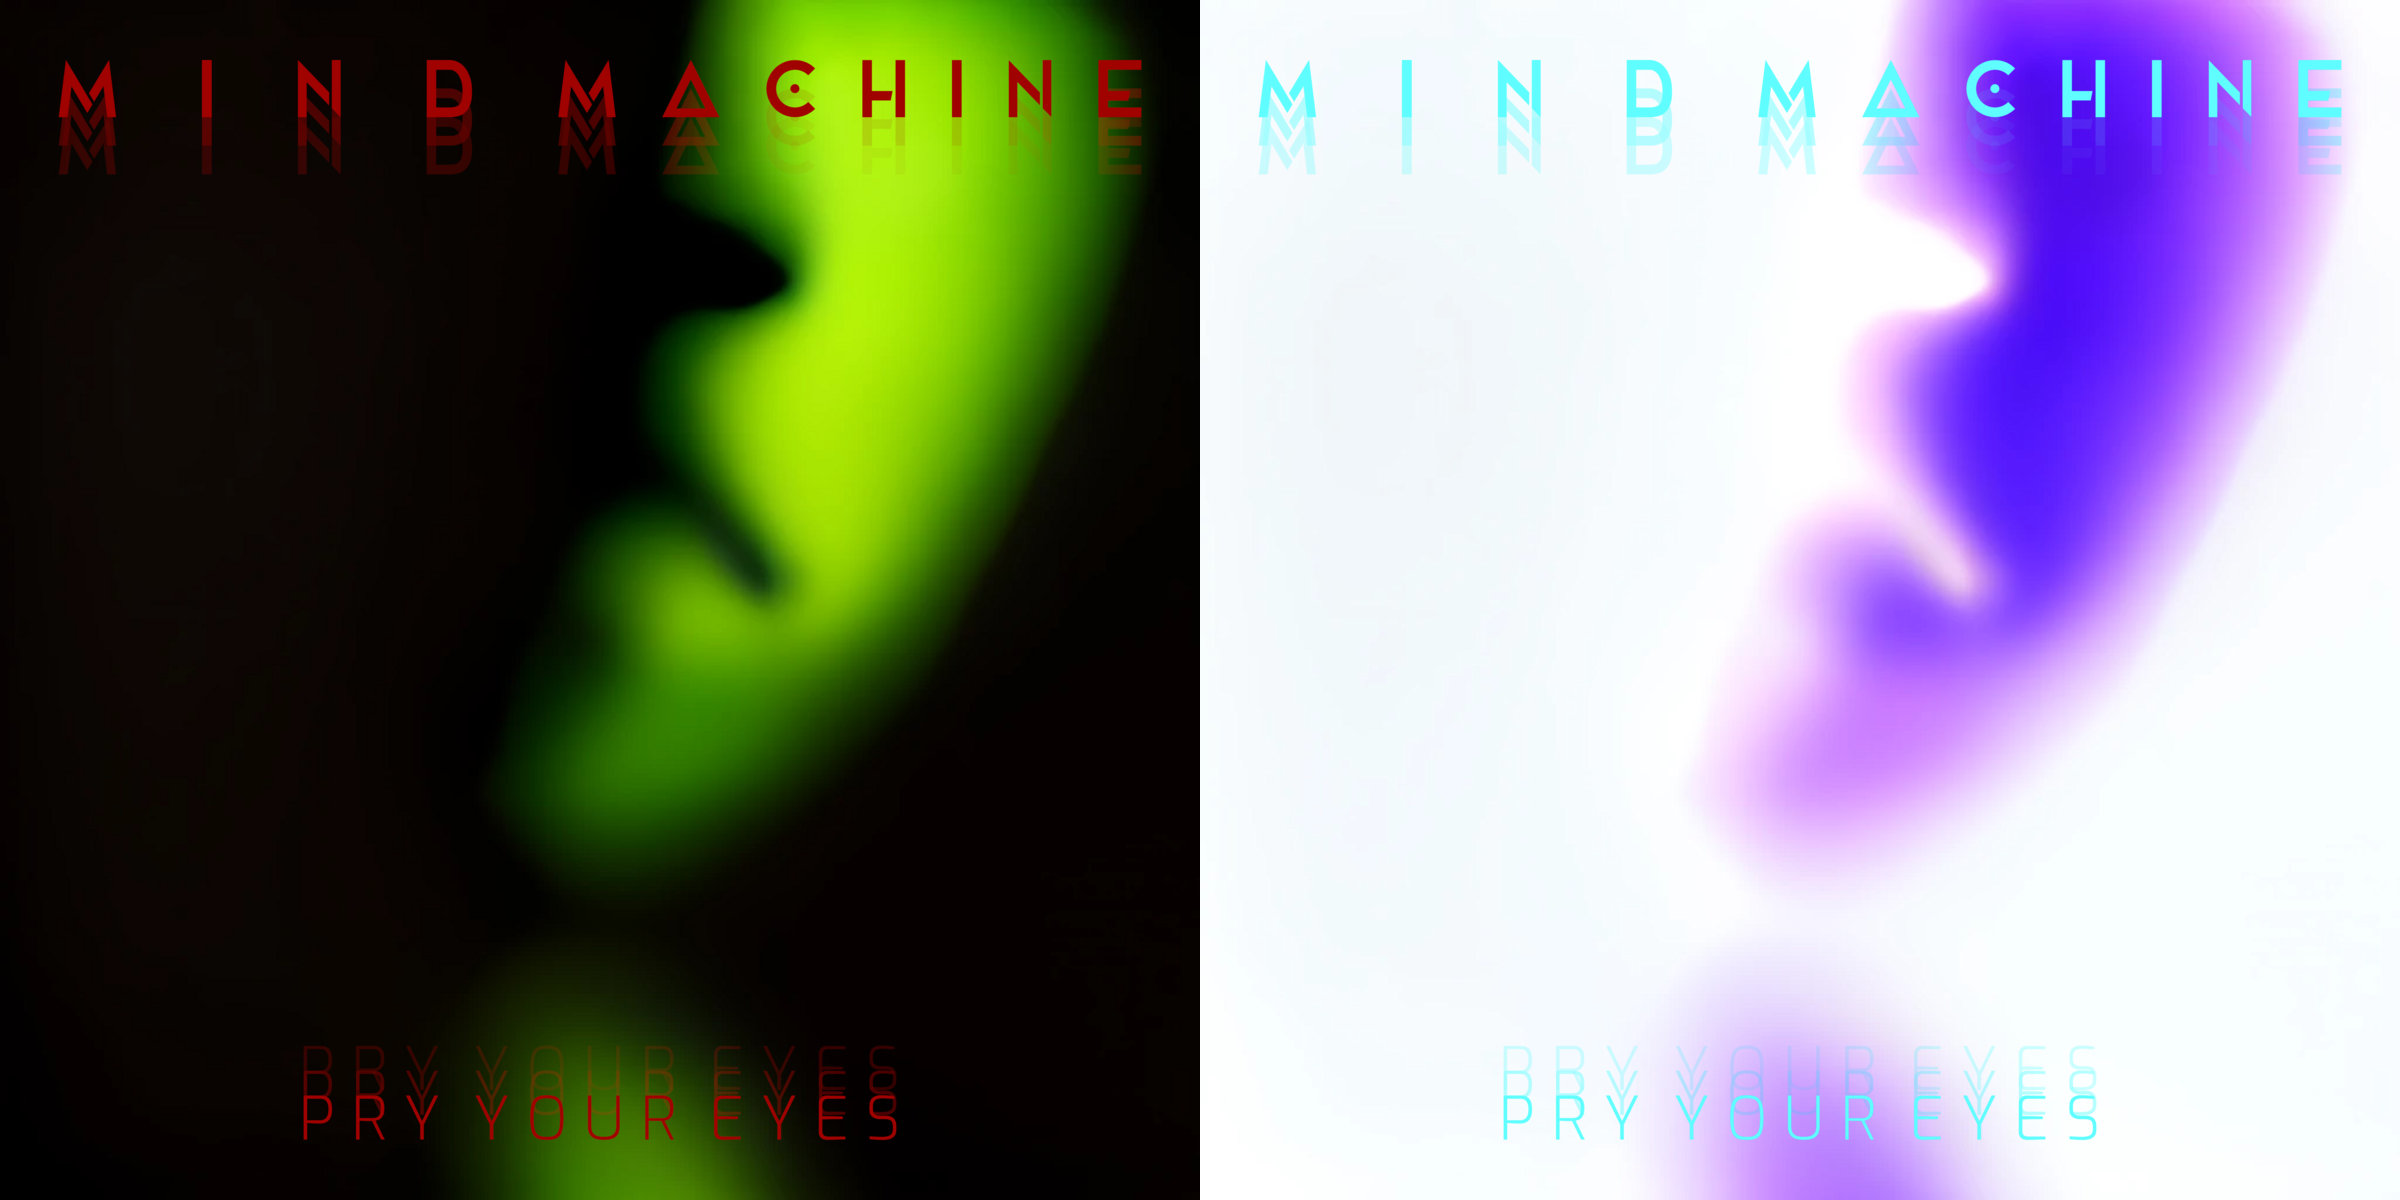 Album art for Mind Machine's new single, "Pry Your Eyes."